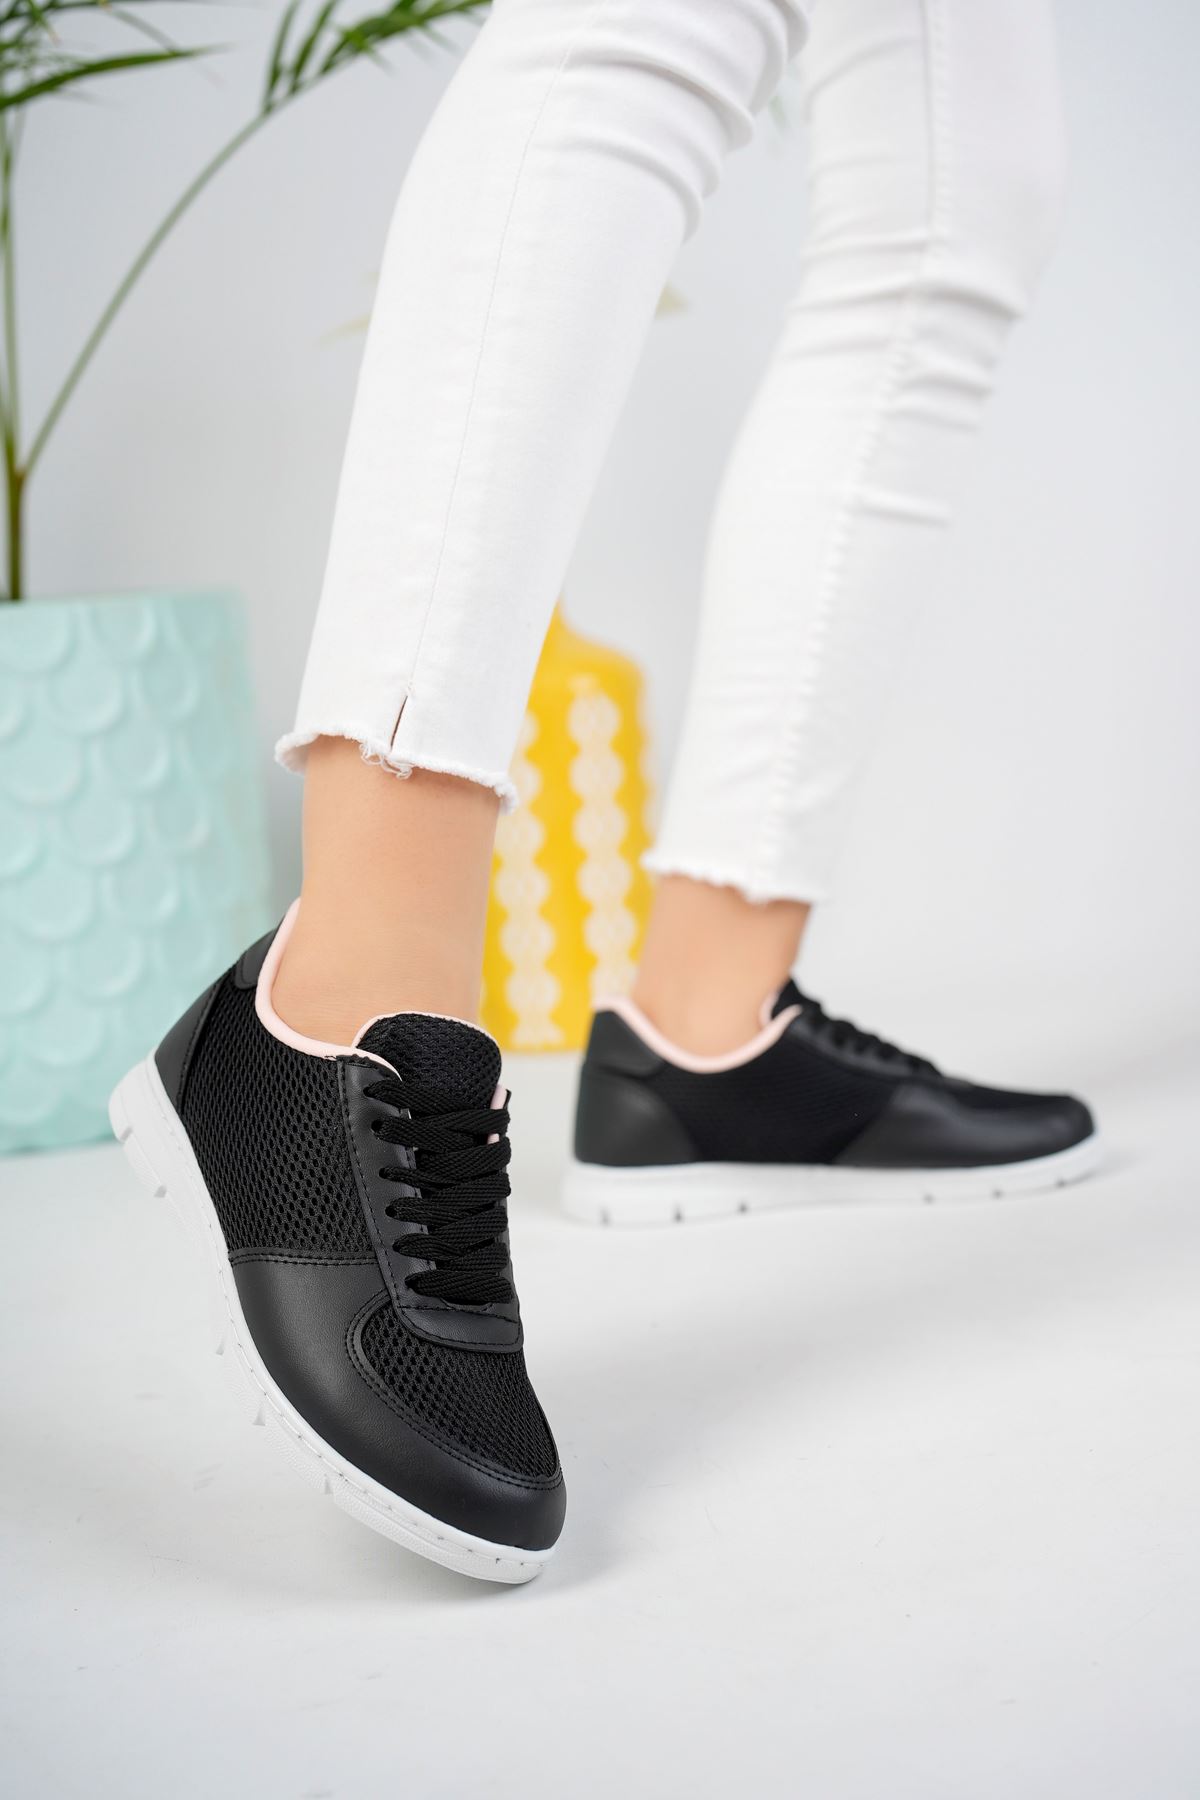 Mesh Black and White Sole Powder Lined Sneakers